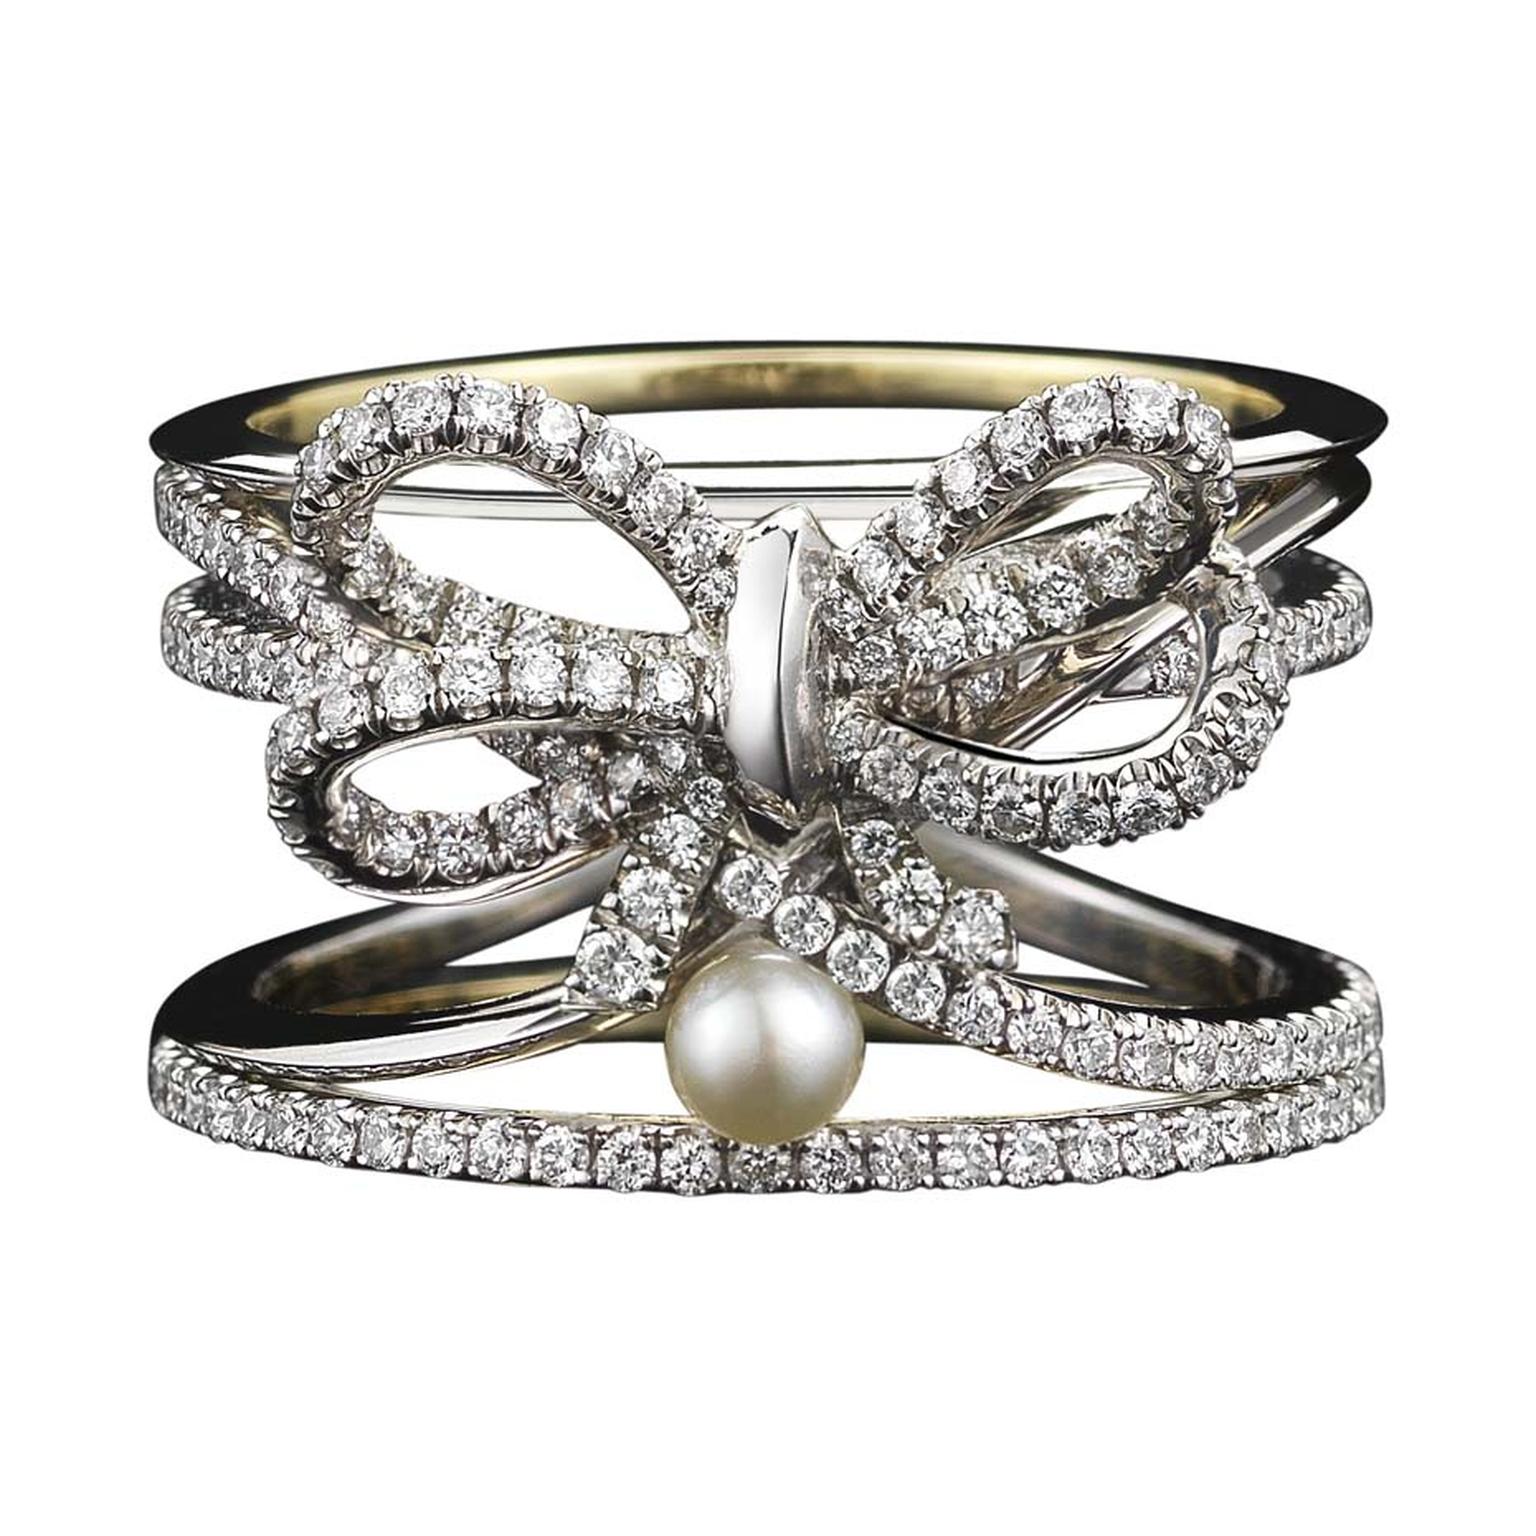 Limited edition Alexandra Mor diamond bow and pearl ring set with knife-edged wire and ‘floating’ diamond melee.